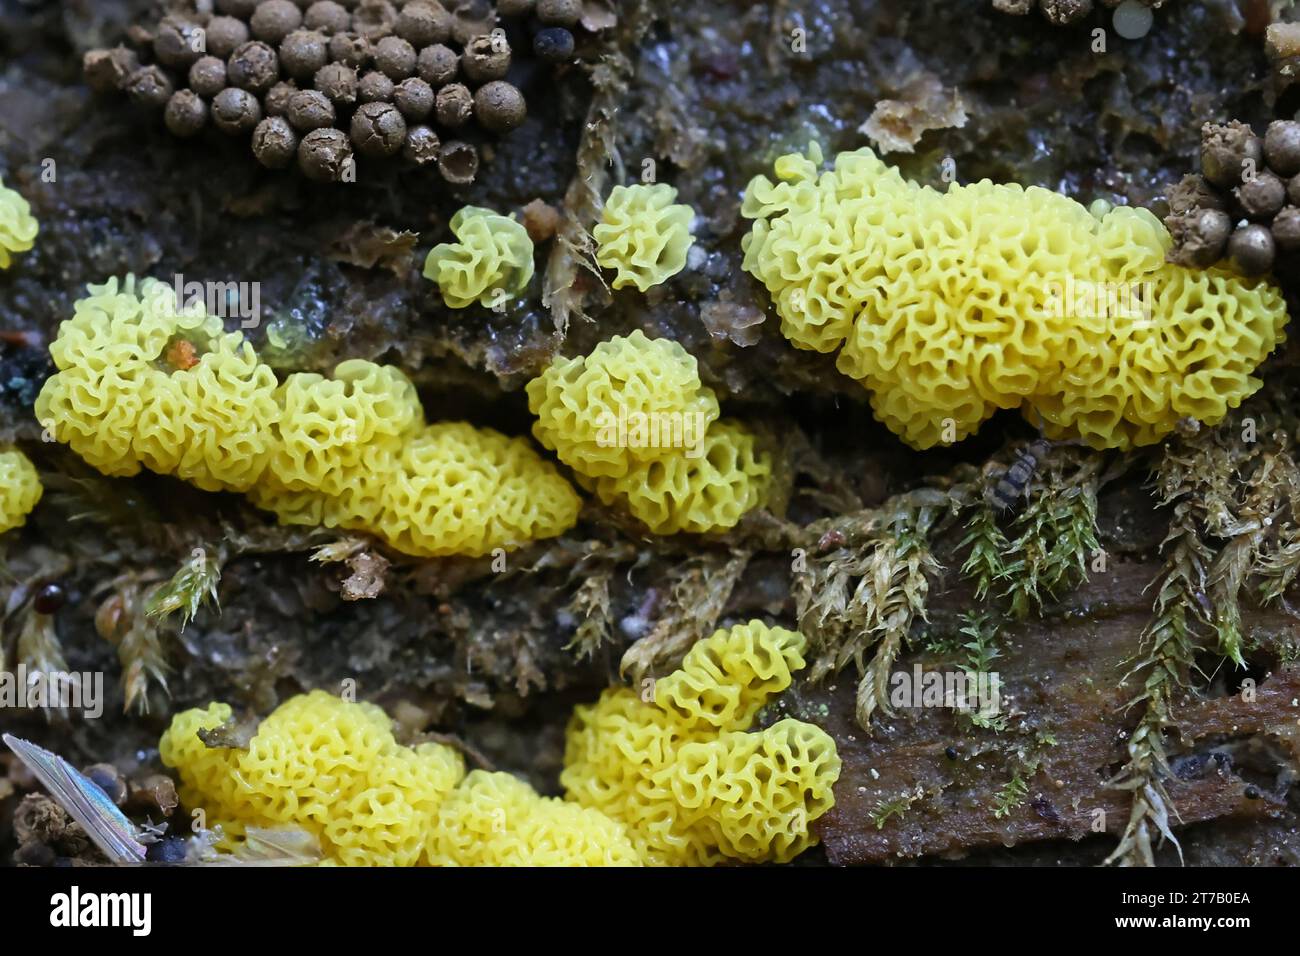 Ceratiomyxa  porioides, also called Ceratiomyxa fructiculosa var. porioides, commonly known as Coral slime mold, yellow variant. Stock Photo